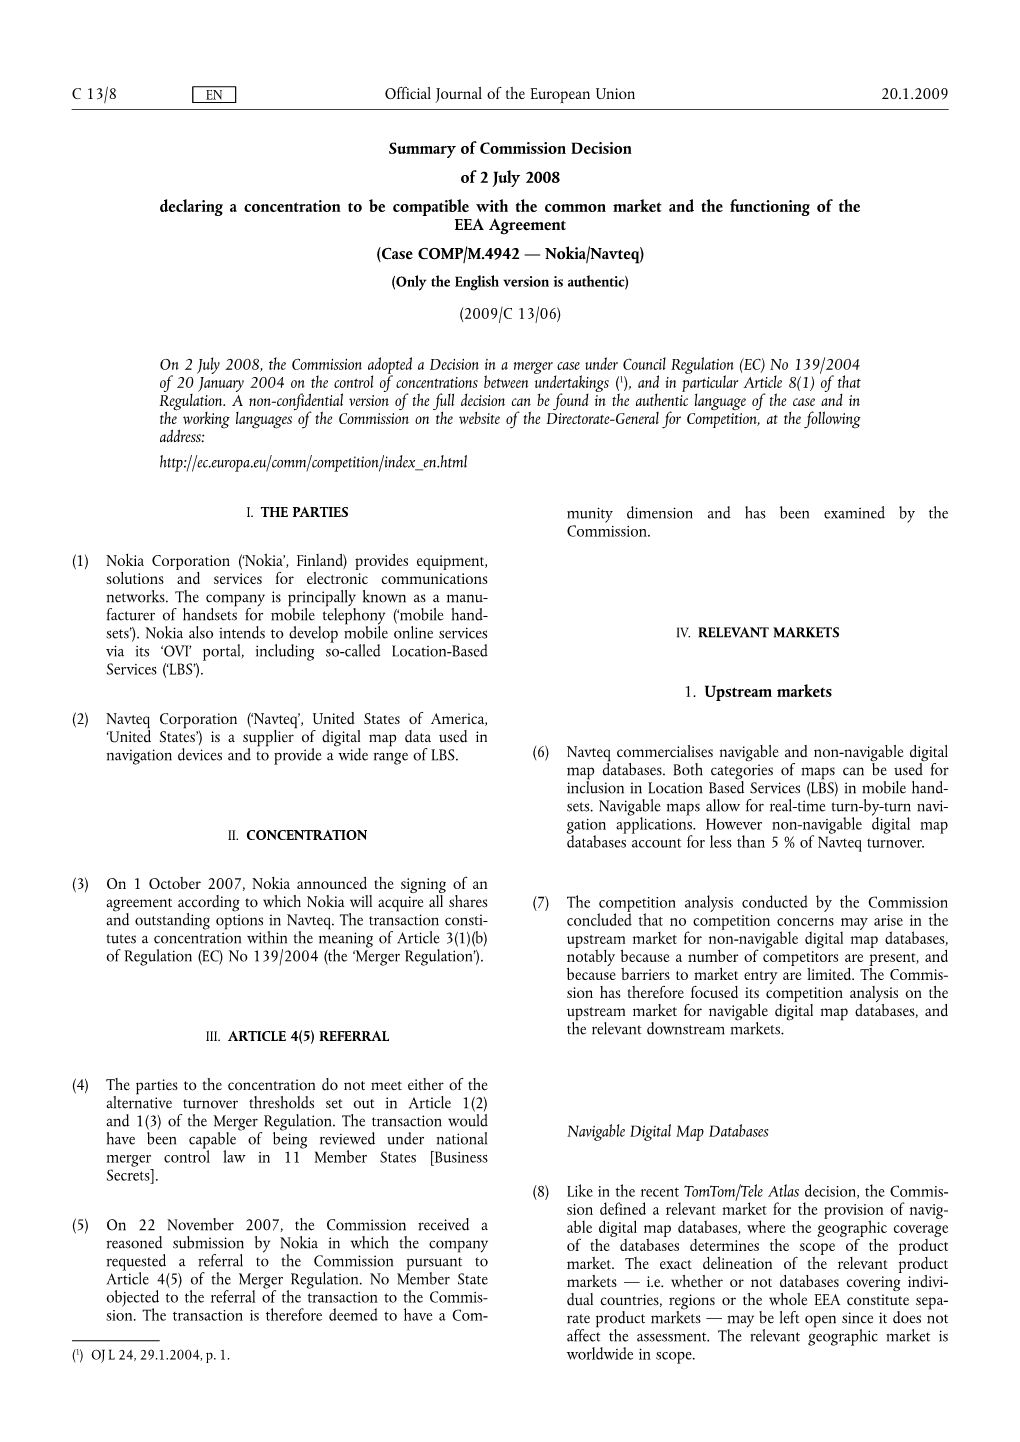 Summary of Commission Decision of 2 July 2008 Declaring A